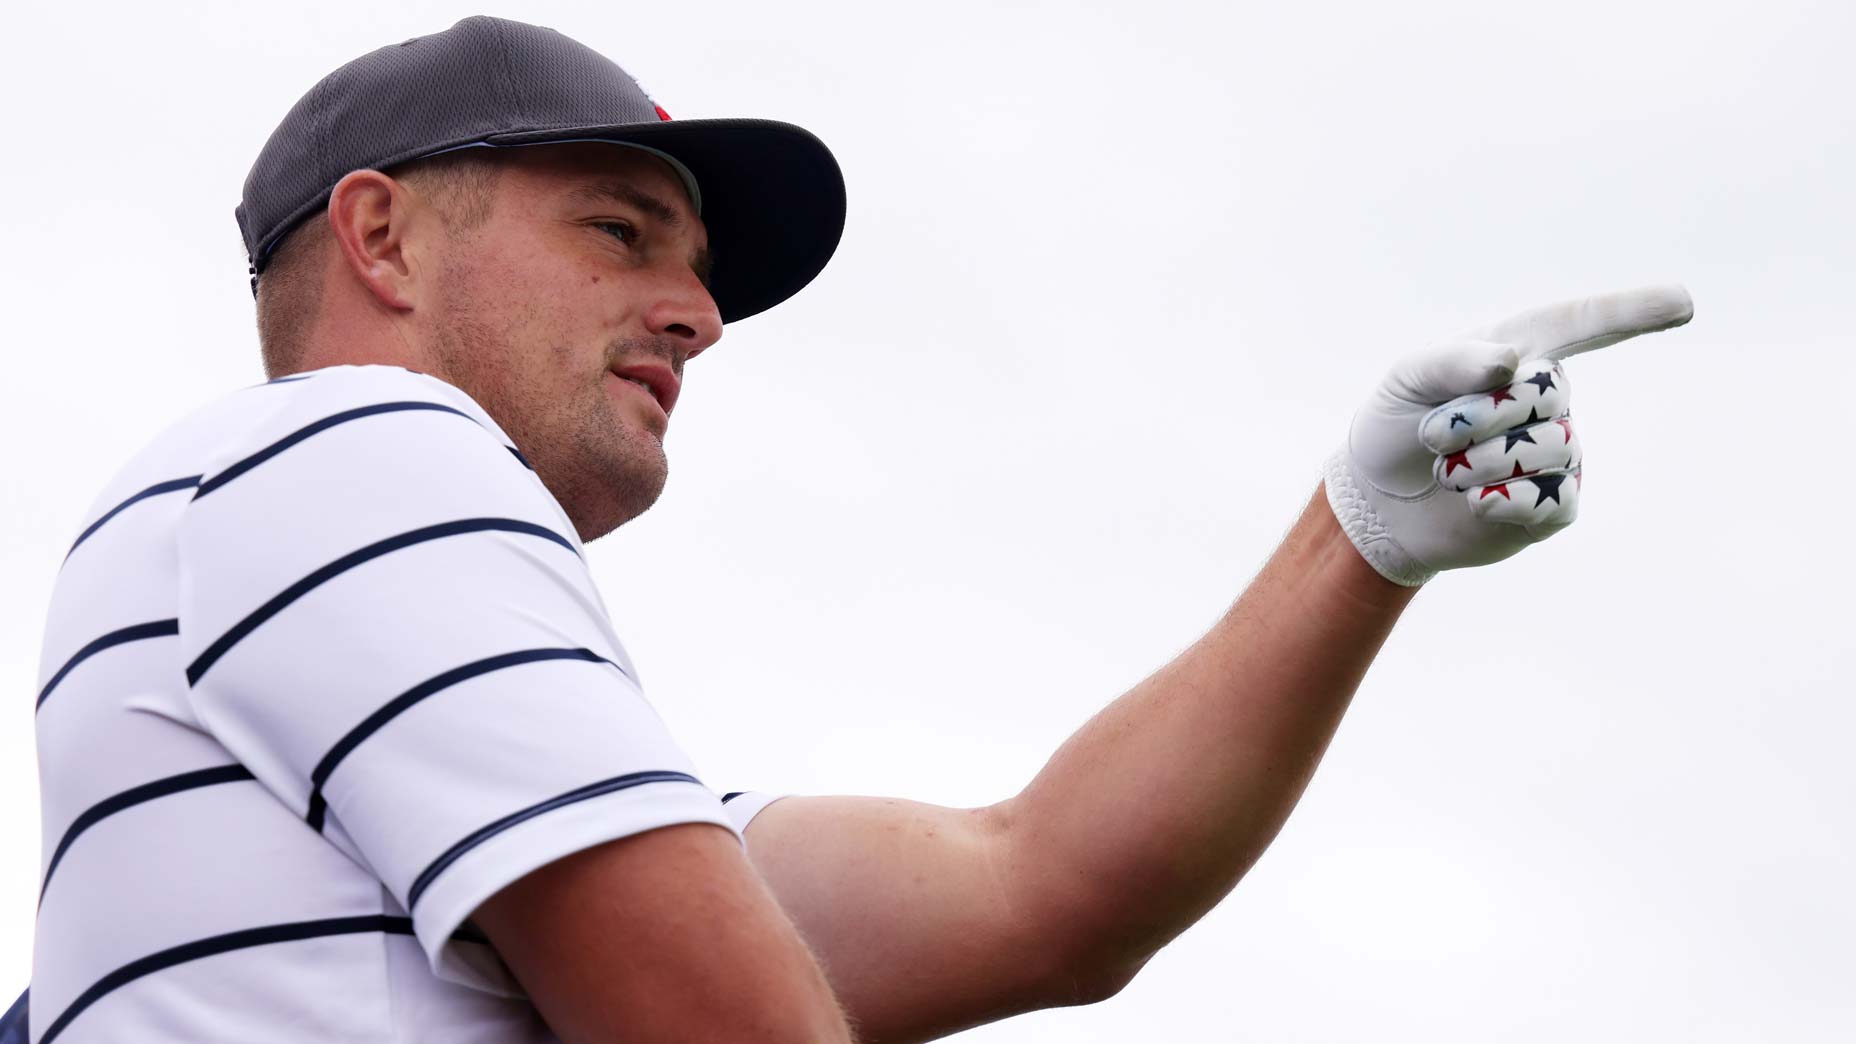 Bryson DeChambeau points with his golf glove ahead of the 2021 Ryder Cup at Whistling Straits